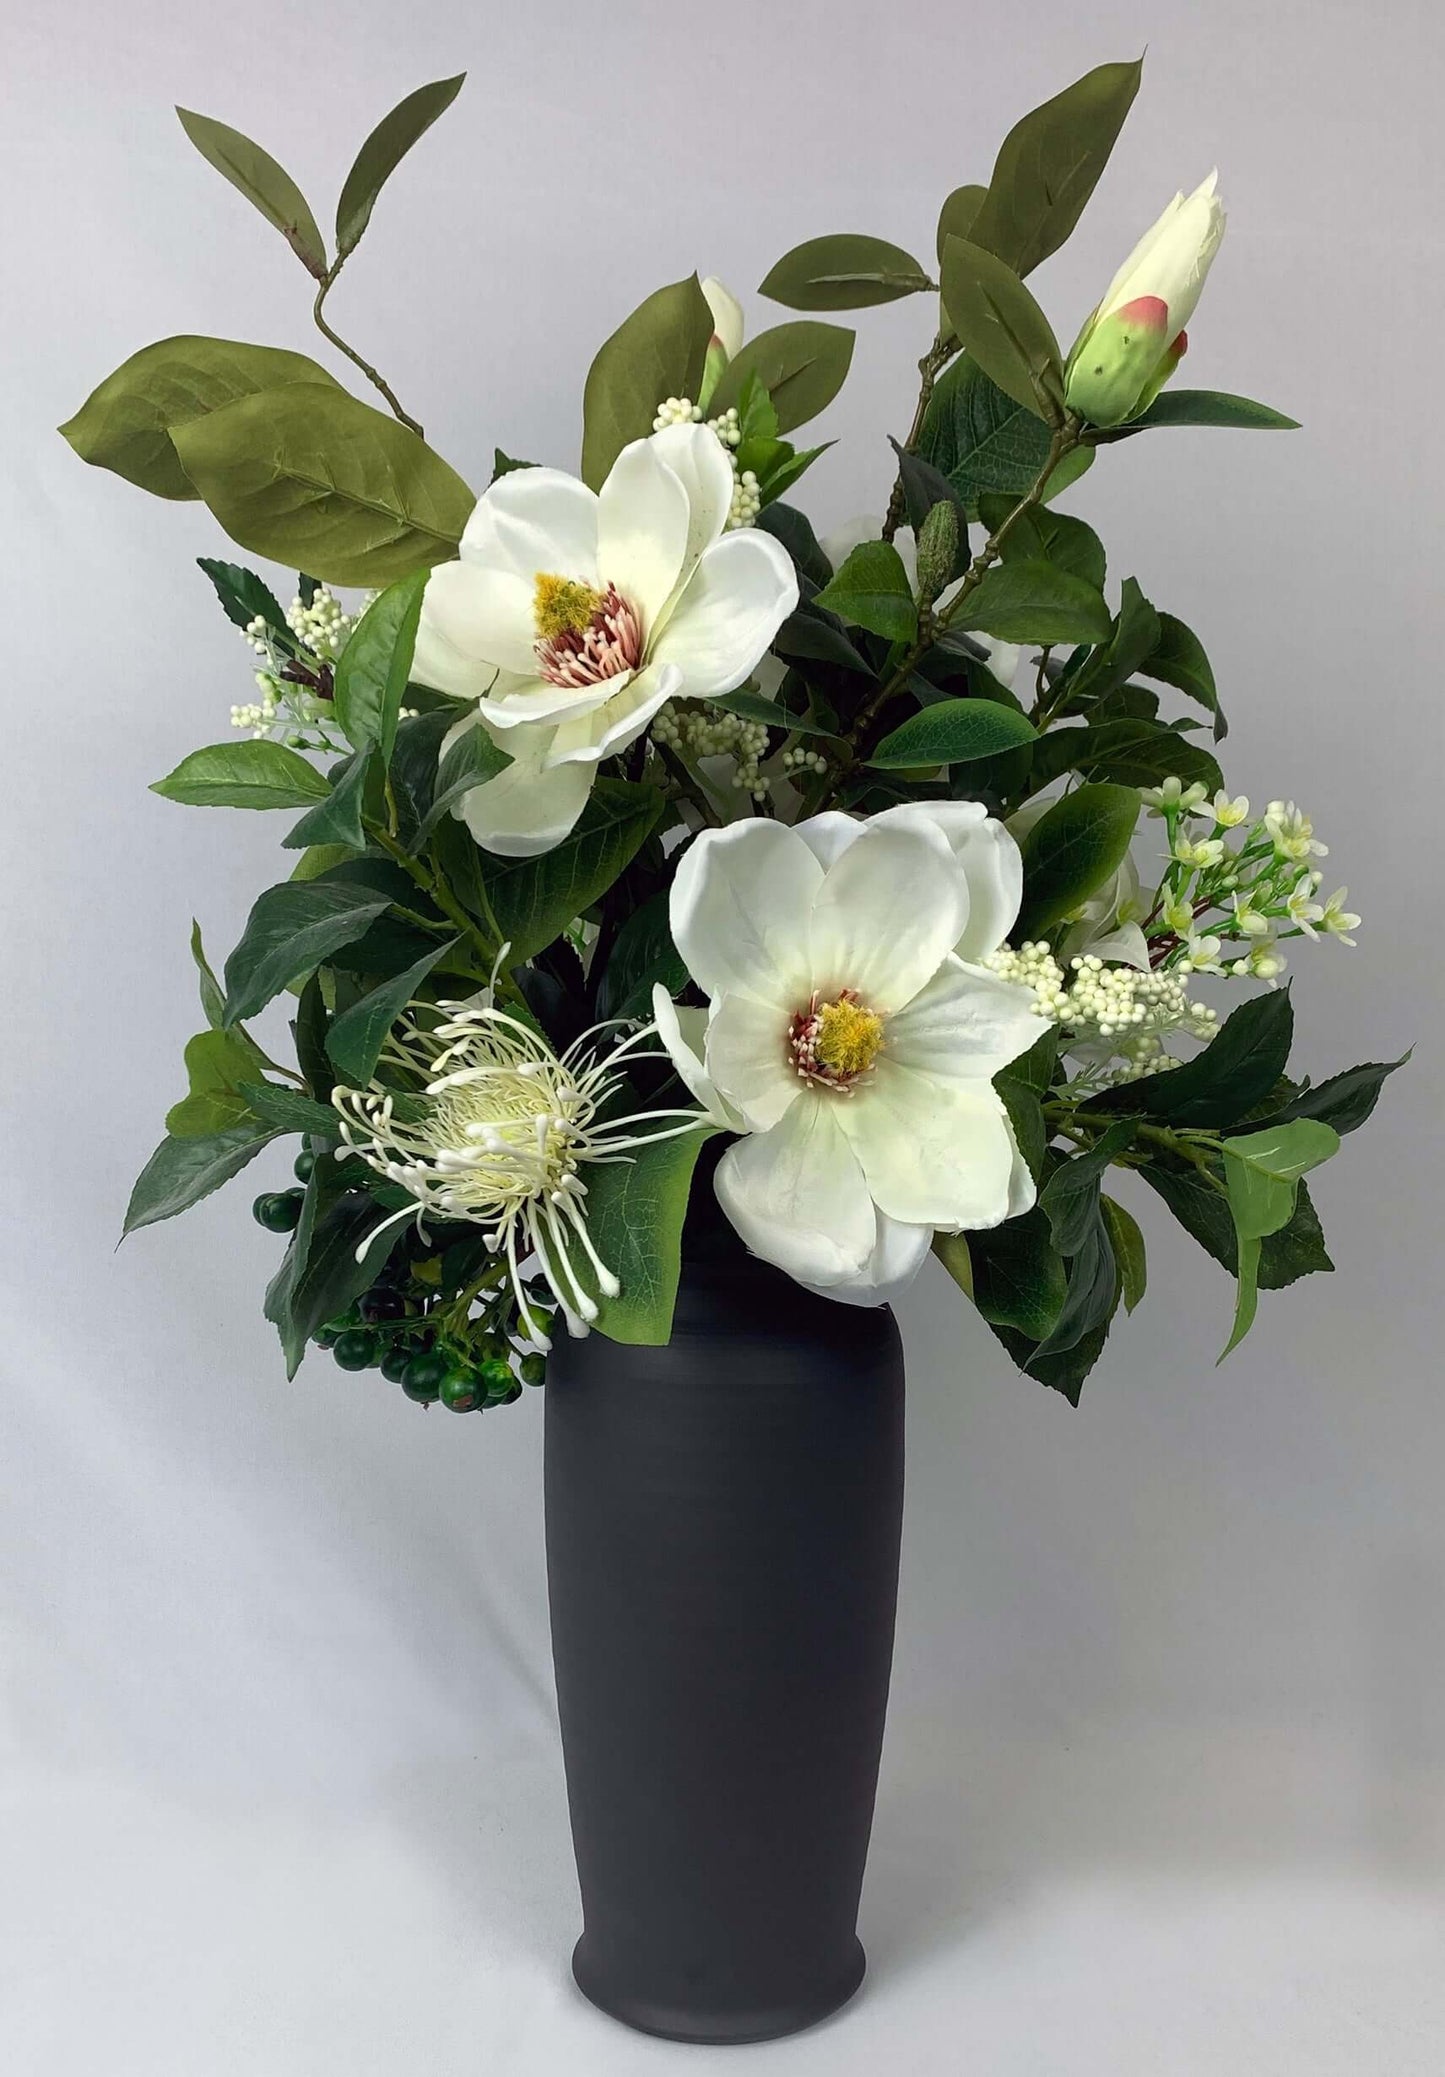 Magnolias, bougainvillaea, wax flower, spider chrysanthemums and green berries in a tall black ceramic vase, inspired by "Old South" romance.  Size:  W34xH58cm  *Found Object – may not mean a new vessel/vase, but one which has been ‘found’ during our searches.